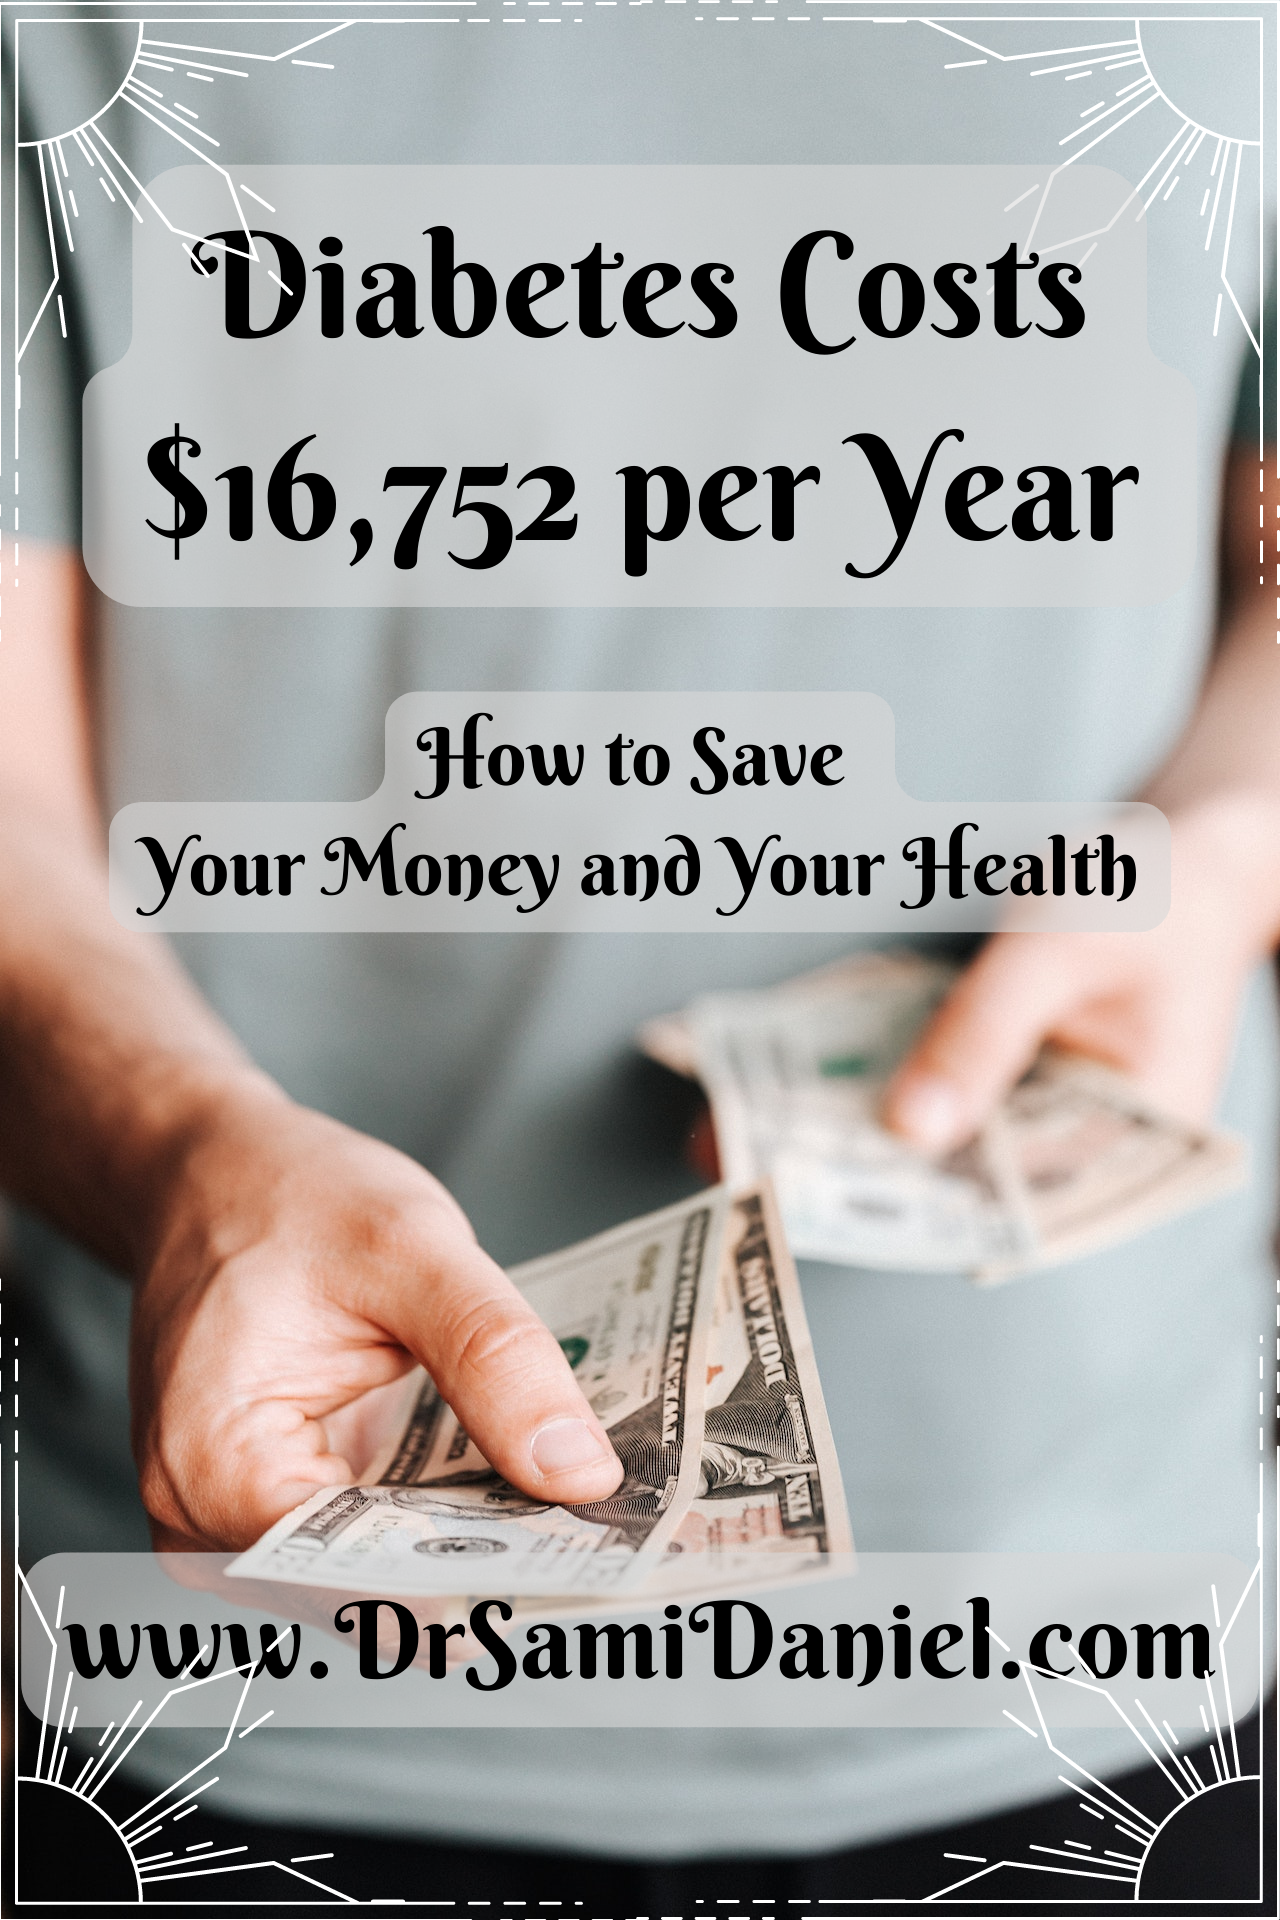 Diabetes Costs $16,752 per Year. How to save your money and your health.